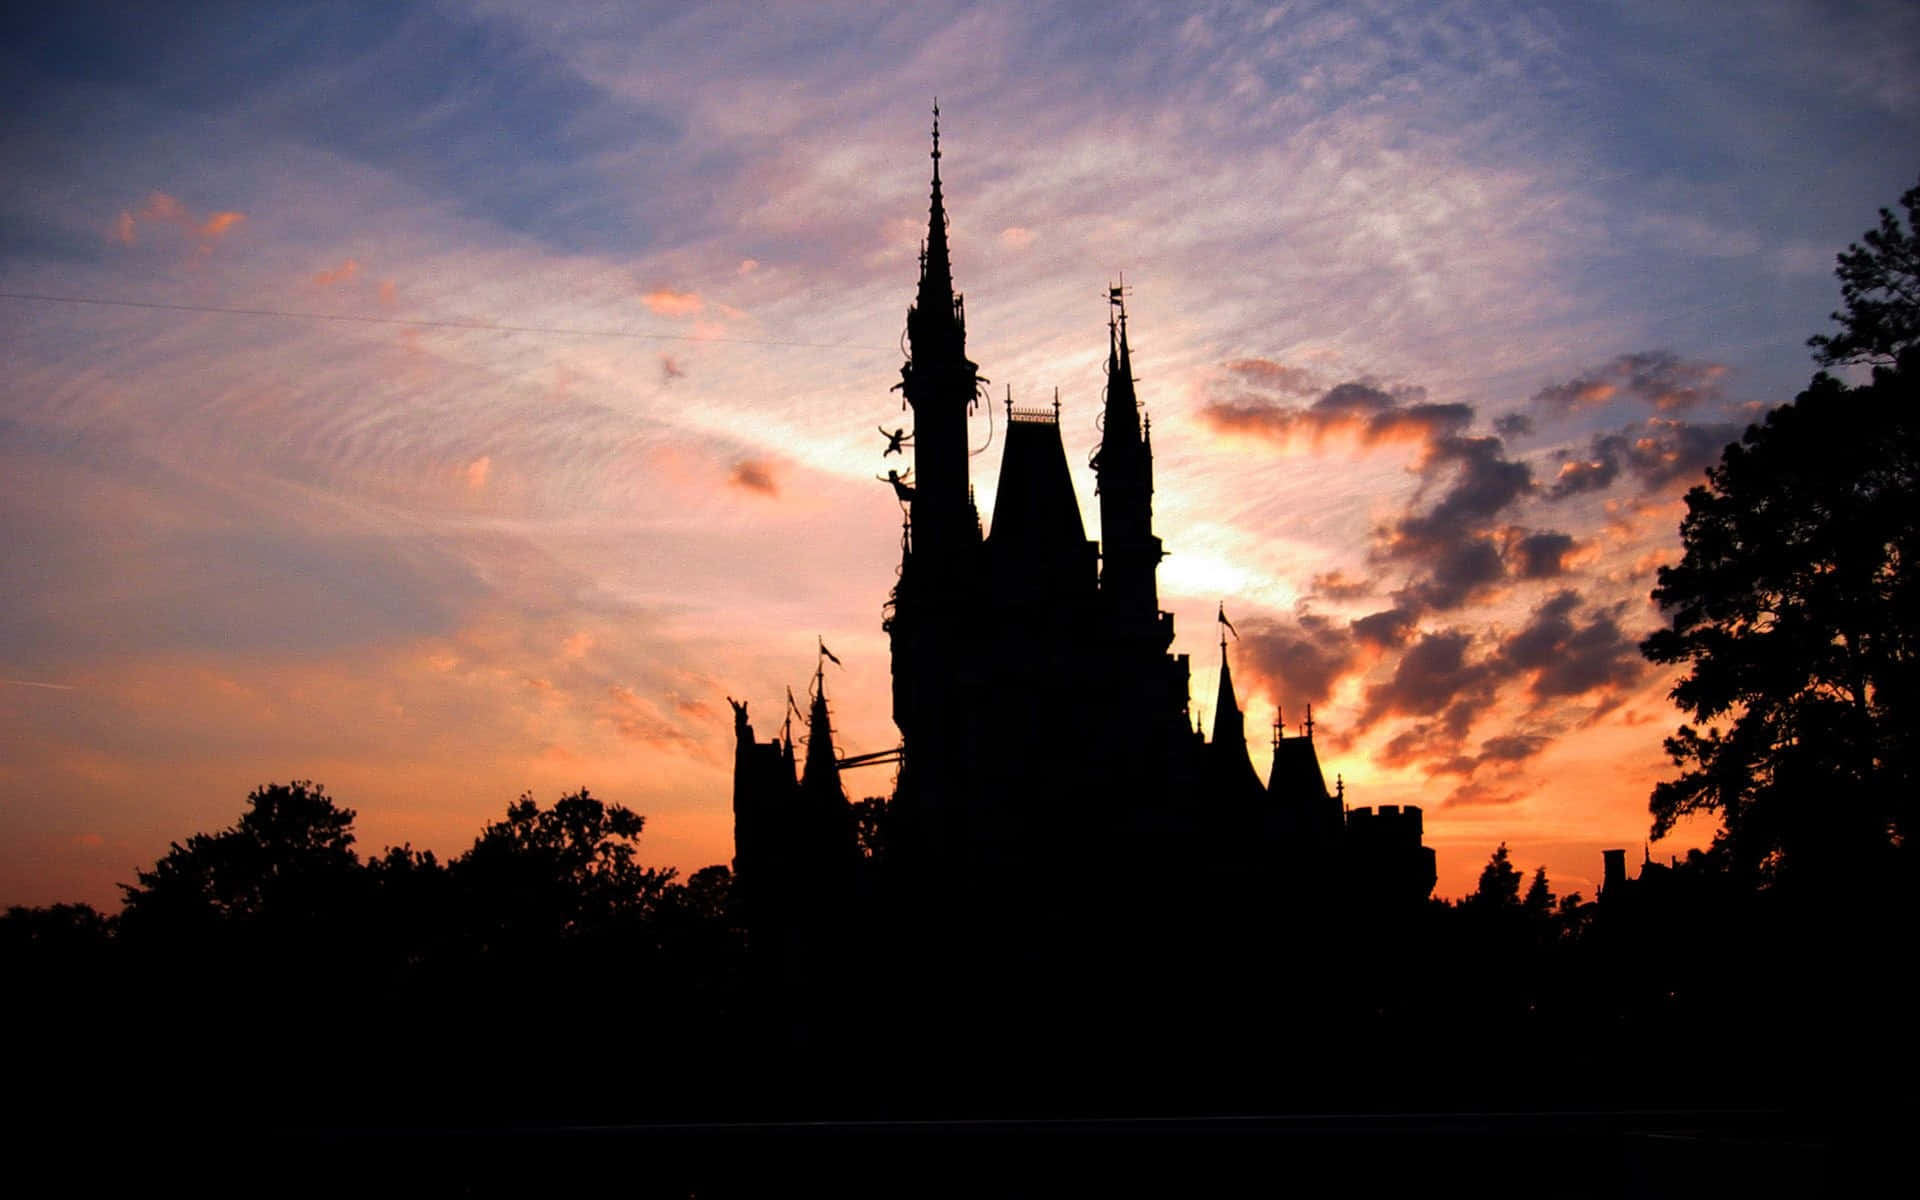 Image  The magical Disney Castle that dreams are made of